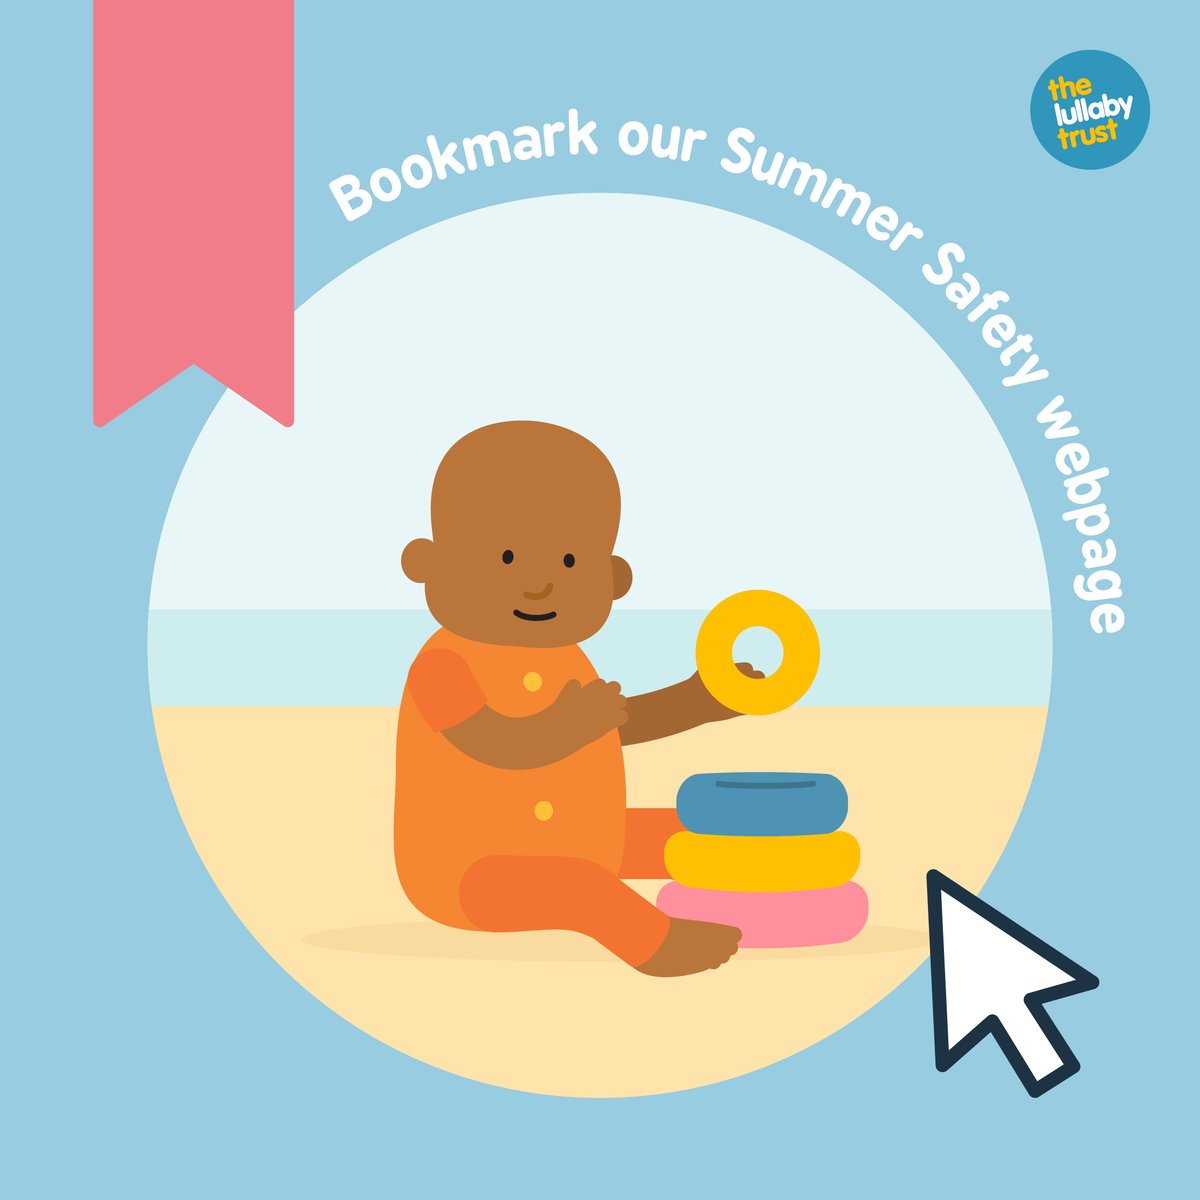 Going abroad this Easter? 😎 Be sure to bookmark our Summer Safety web page! It has tips on keeping baby cool, safer sleep in the heat, and information about travelling with a little one: bit.ly/3vdBXXf